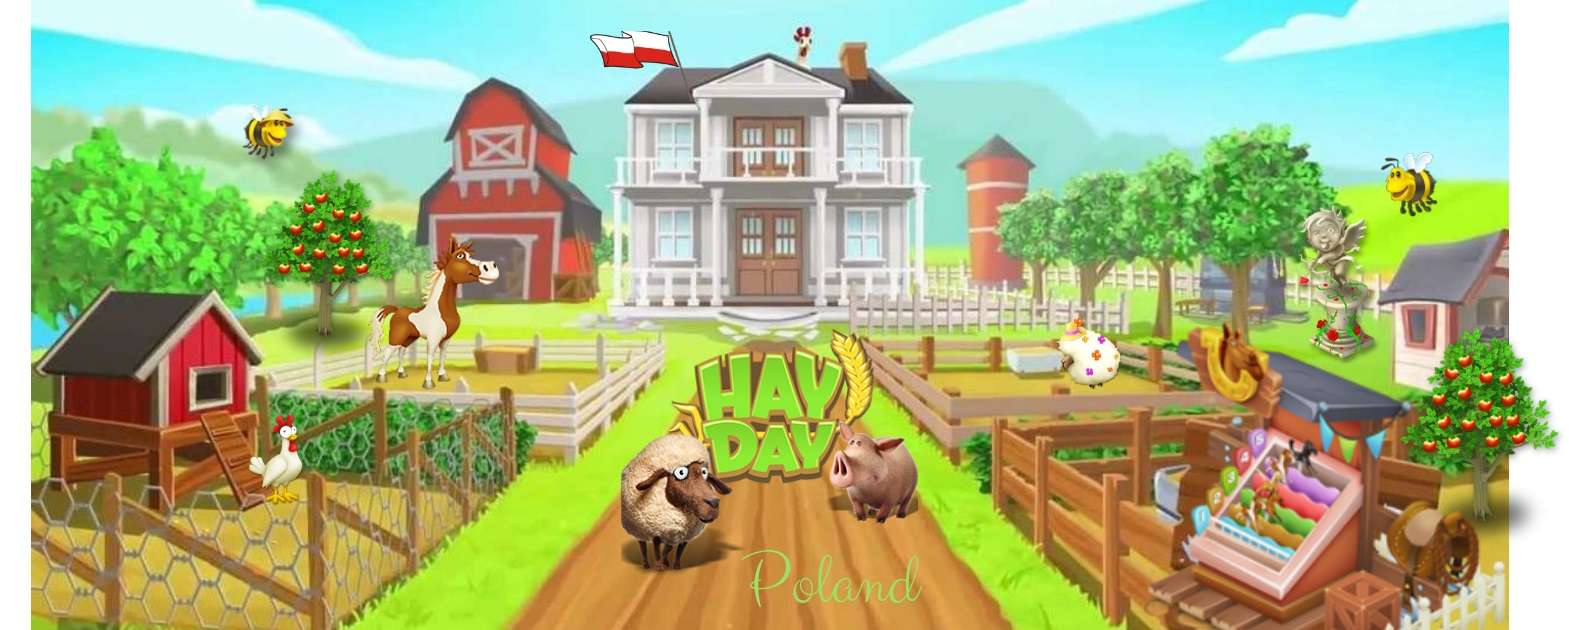 Hay Day Poland online puzzle